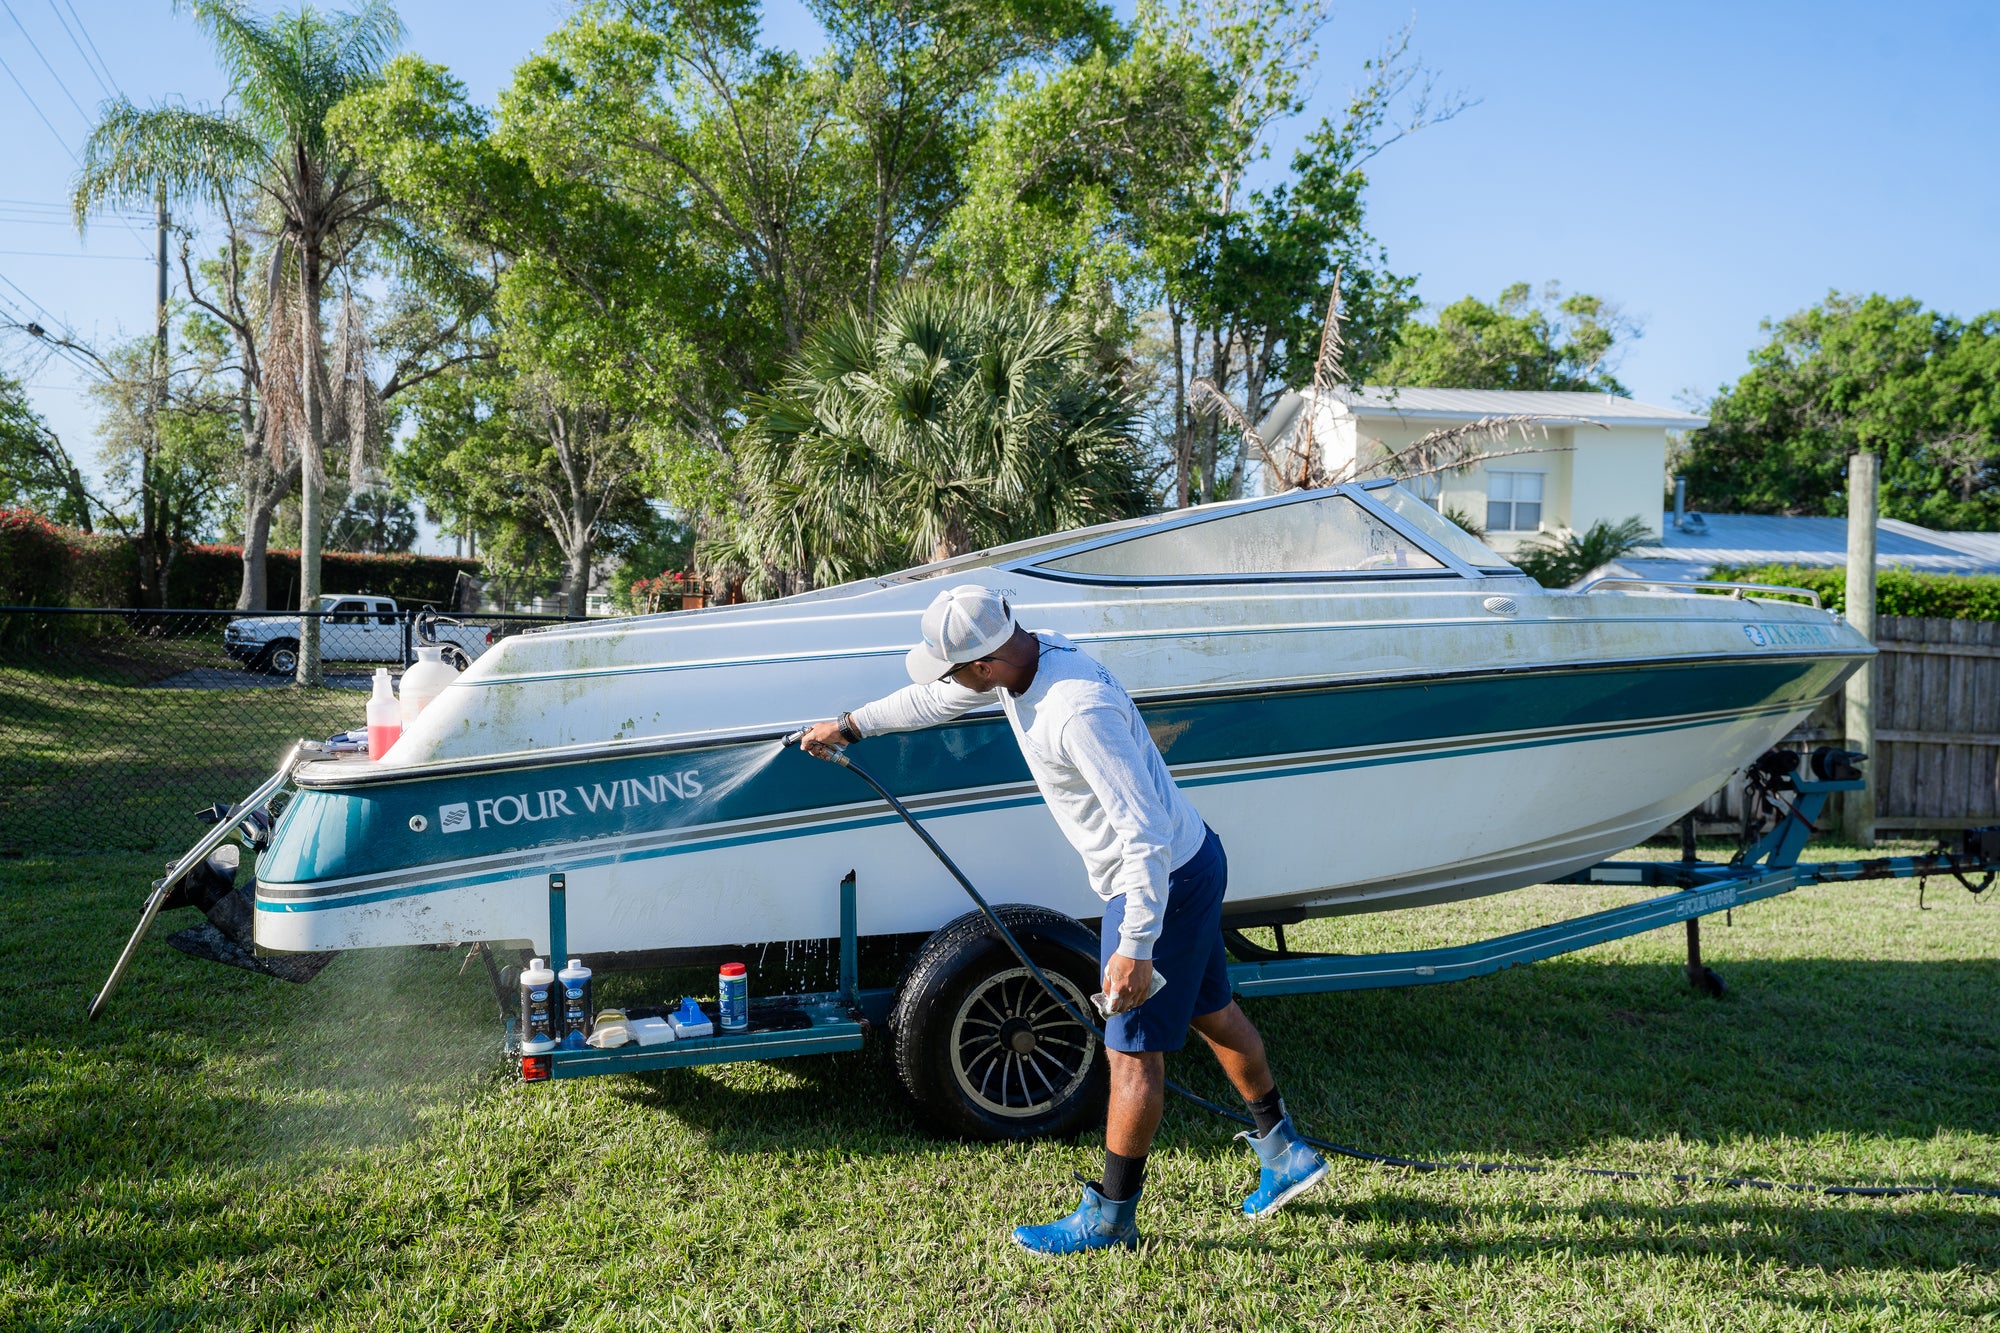 How To Wash a Boat